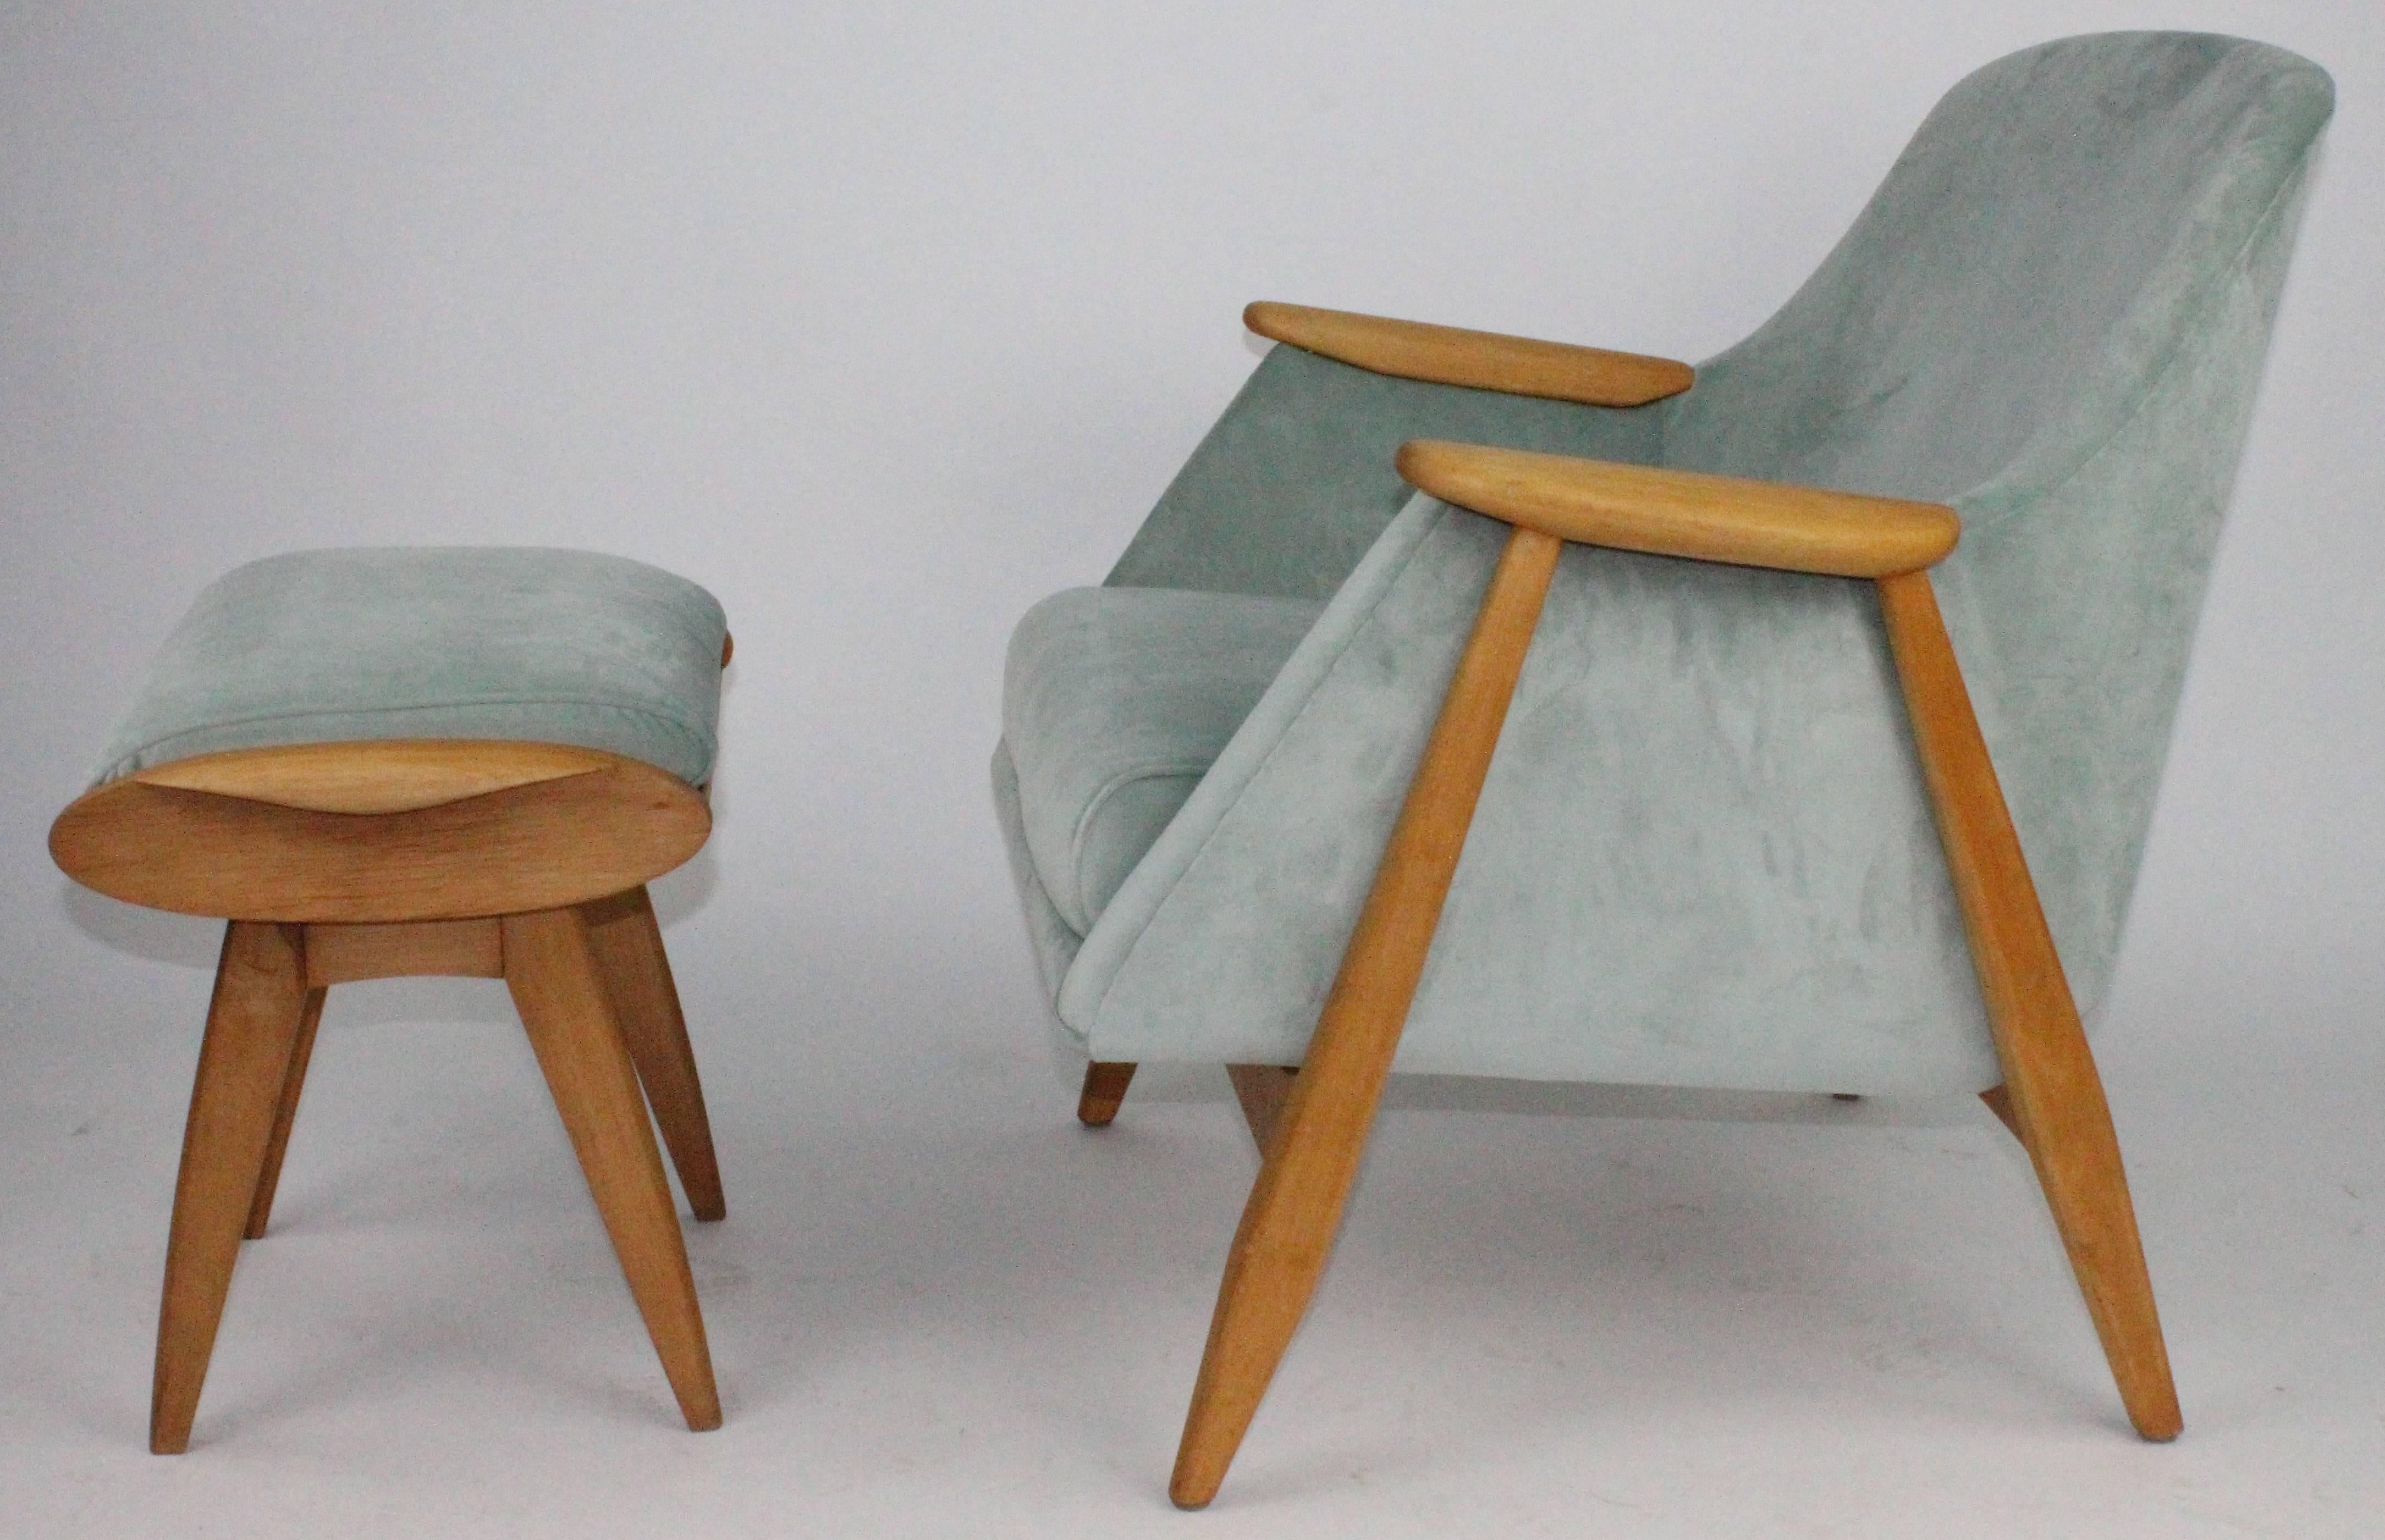 A wonderful set of an easy chair with stool. By Swedish designer Svante Skogh for Finnish maker Asko. This is model no 2418. Recently restored and newly upholstered in a light green velvet of high quality. This set was designed by Svante Skogh in